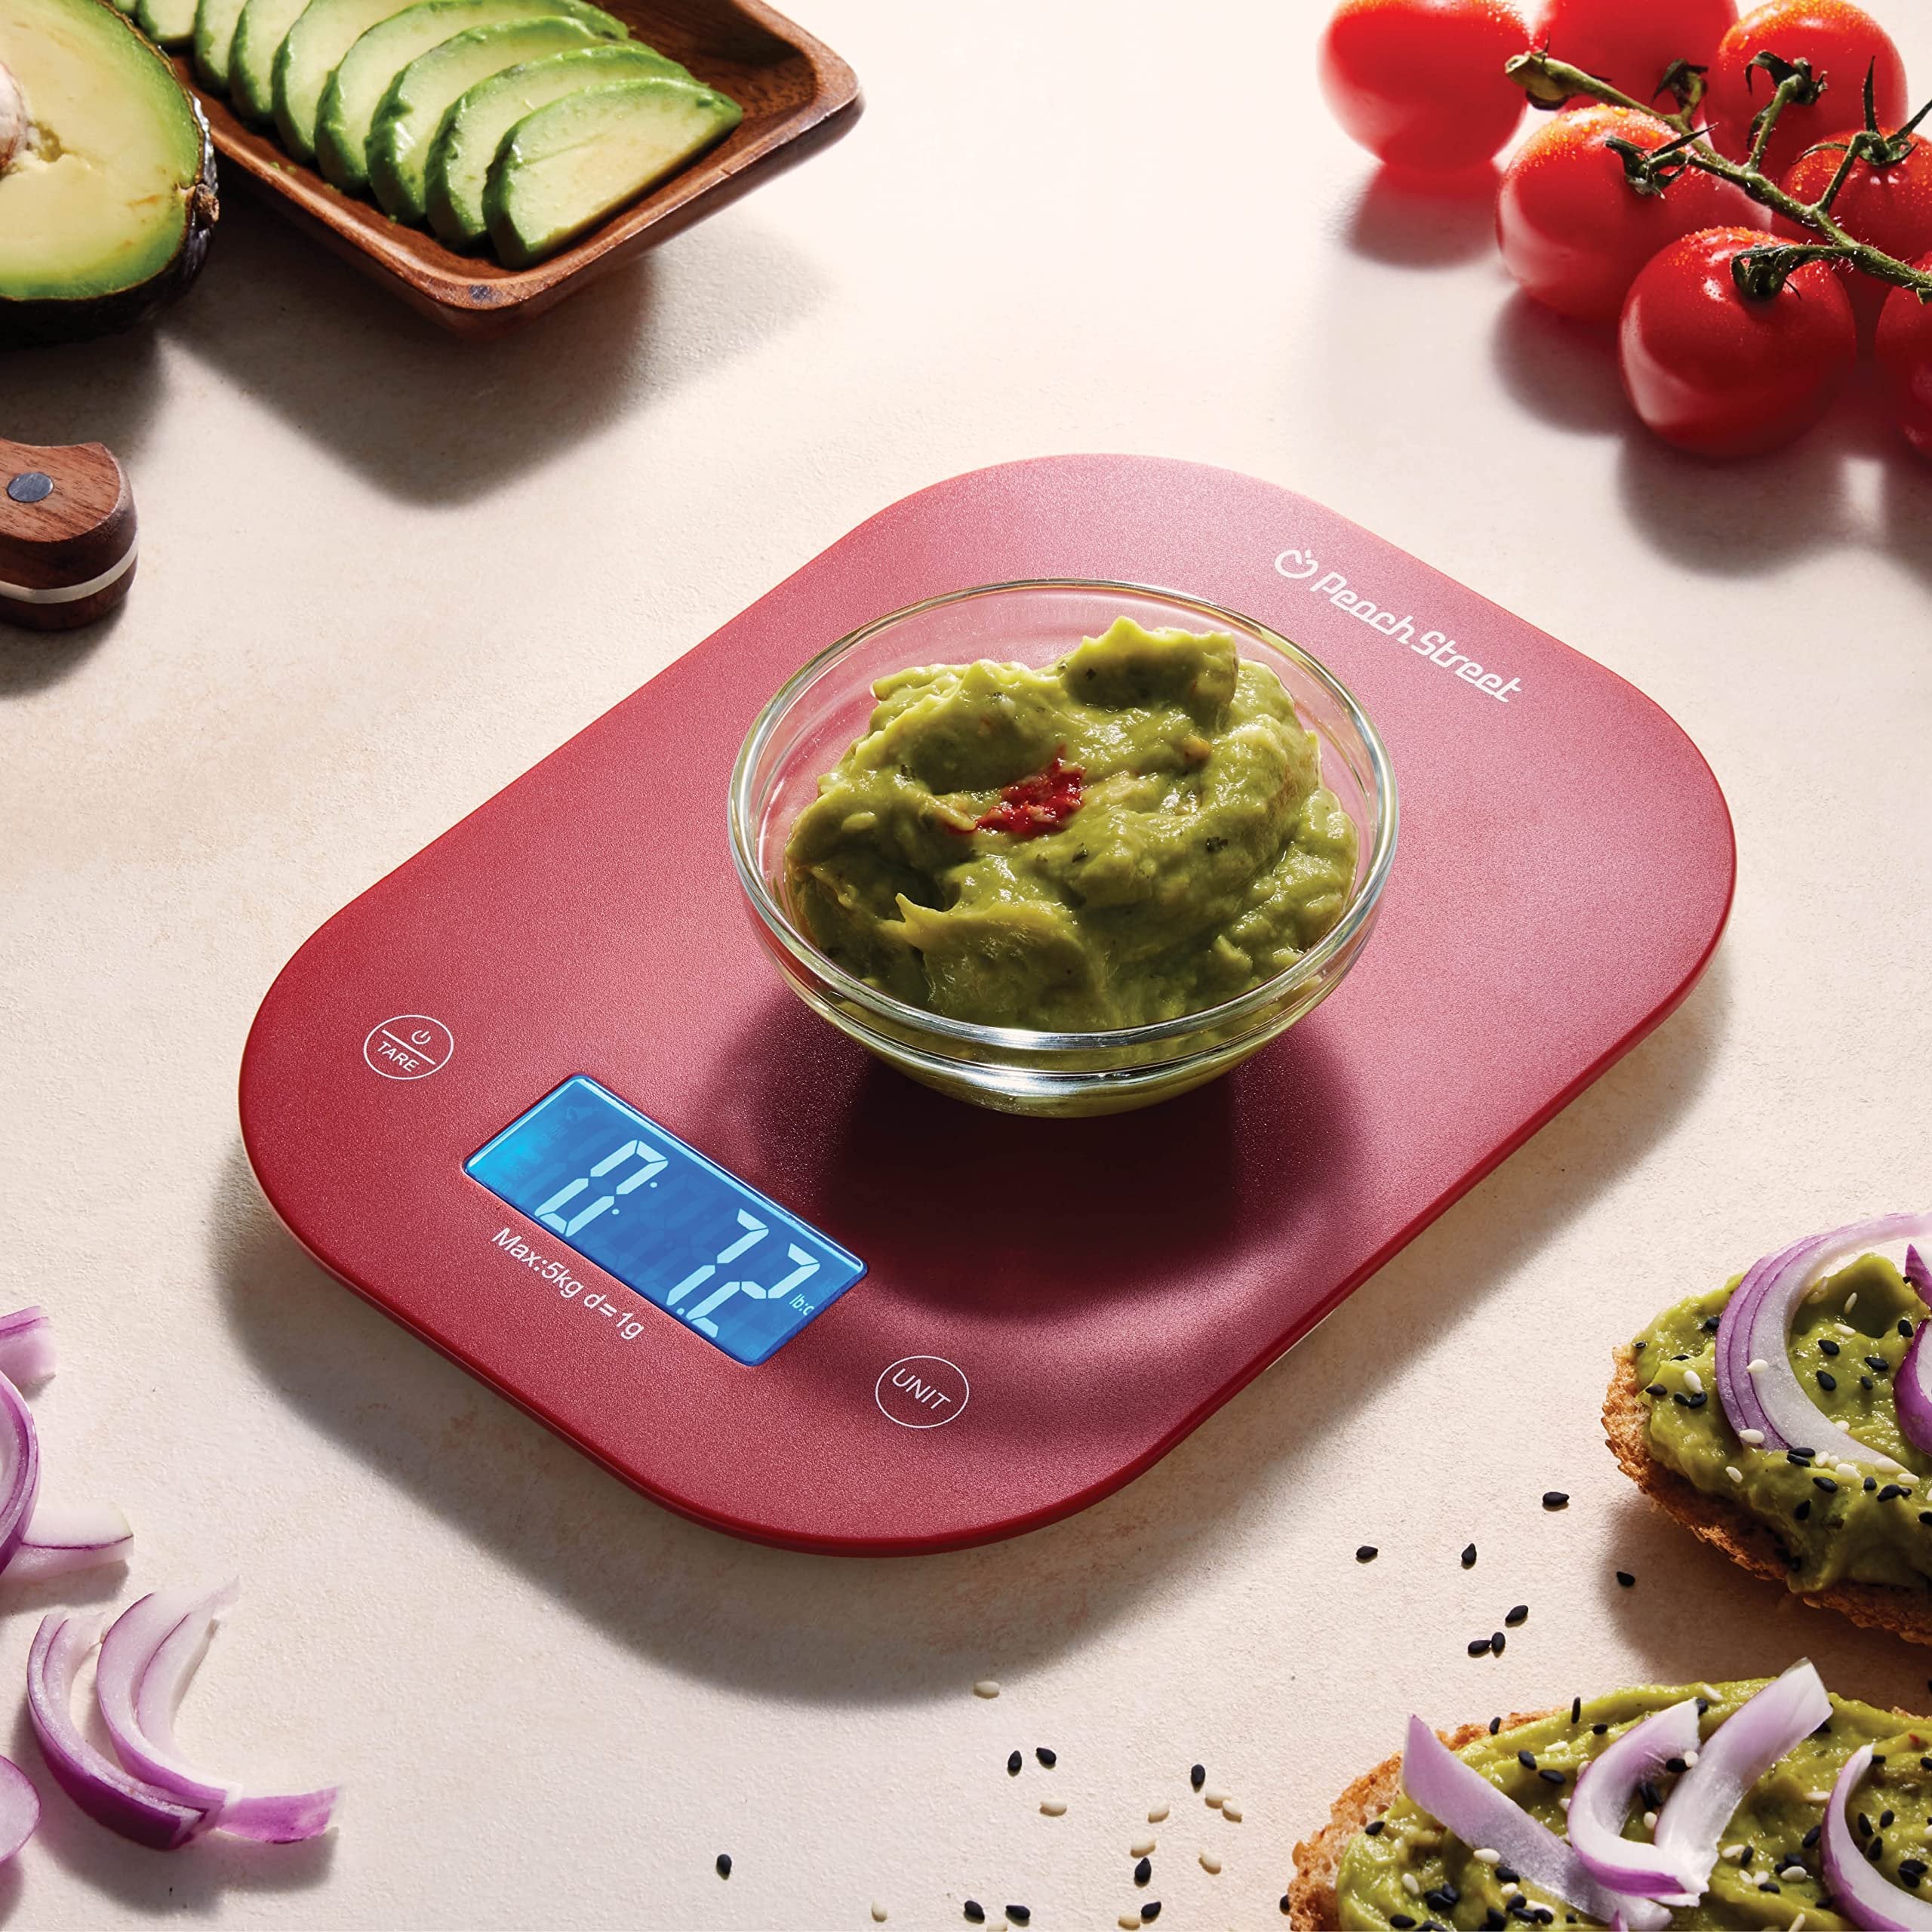 Digital Kitchen Food Scale - LCD Display Weight in Grams, Kilograms, Ounces, Fl Ounces, Milliliters, and Pounds Perfect for Precise Measurements, Baking, Cooking, Meal Prep, Weight Loss,